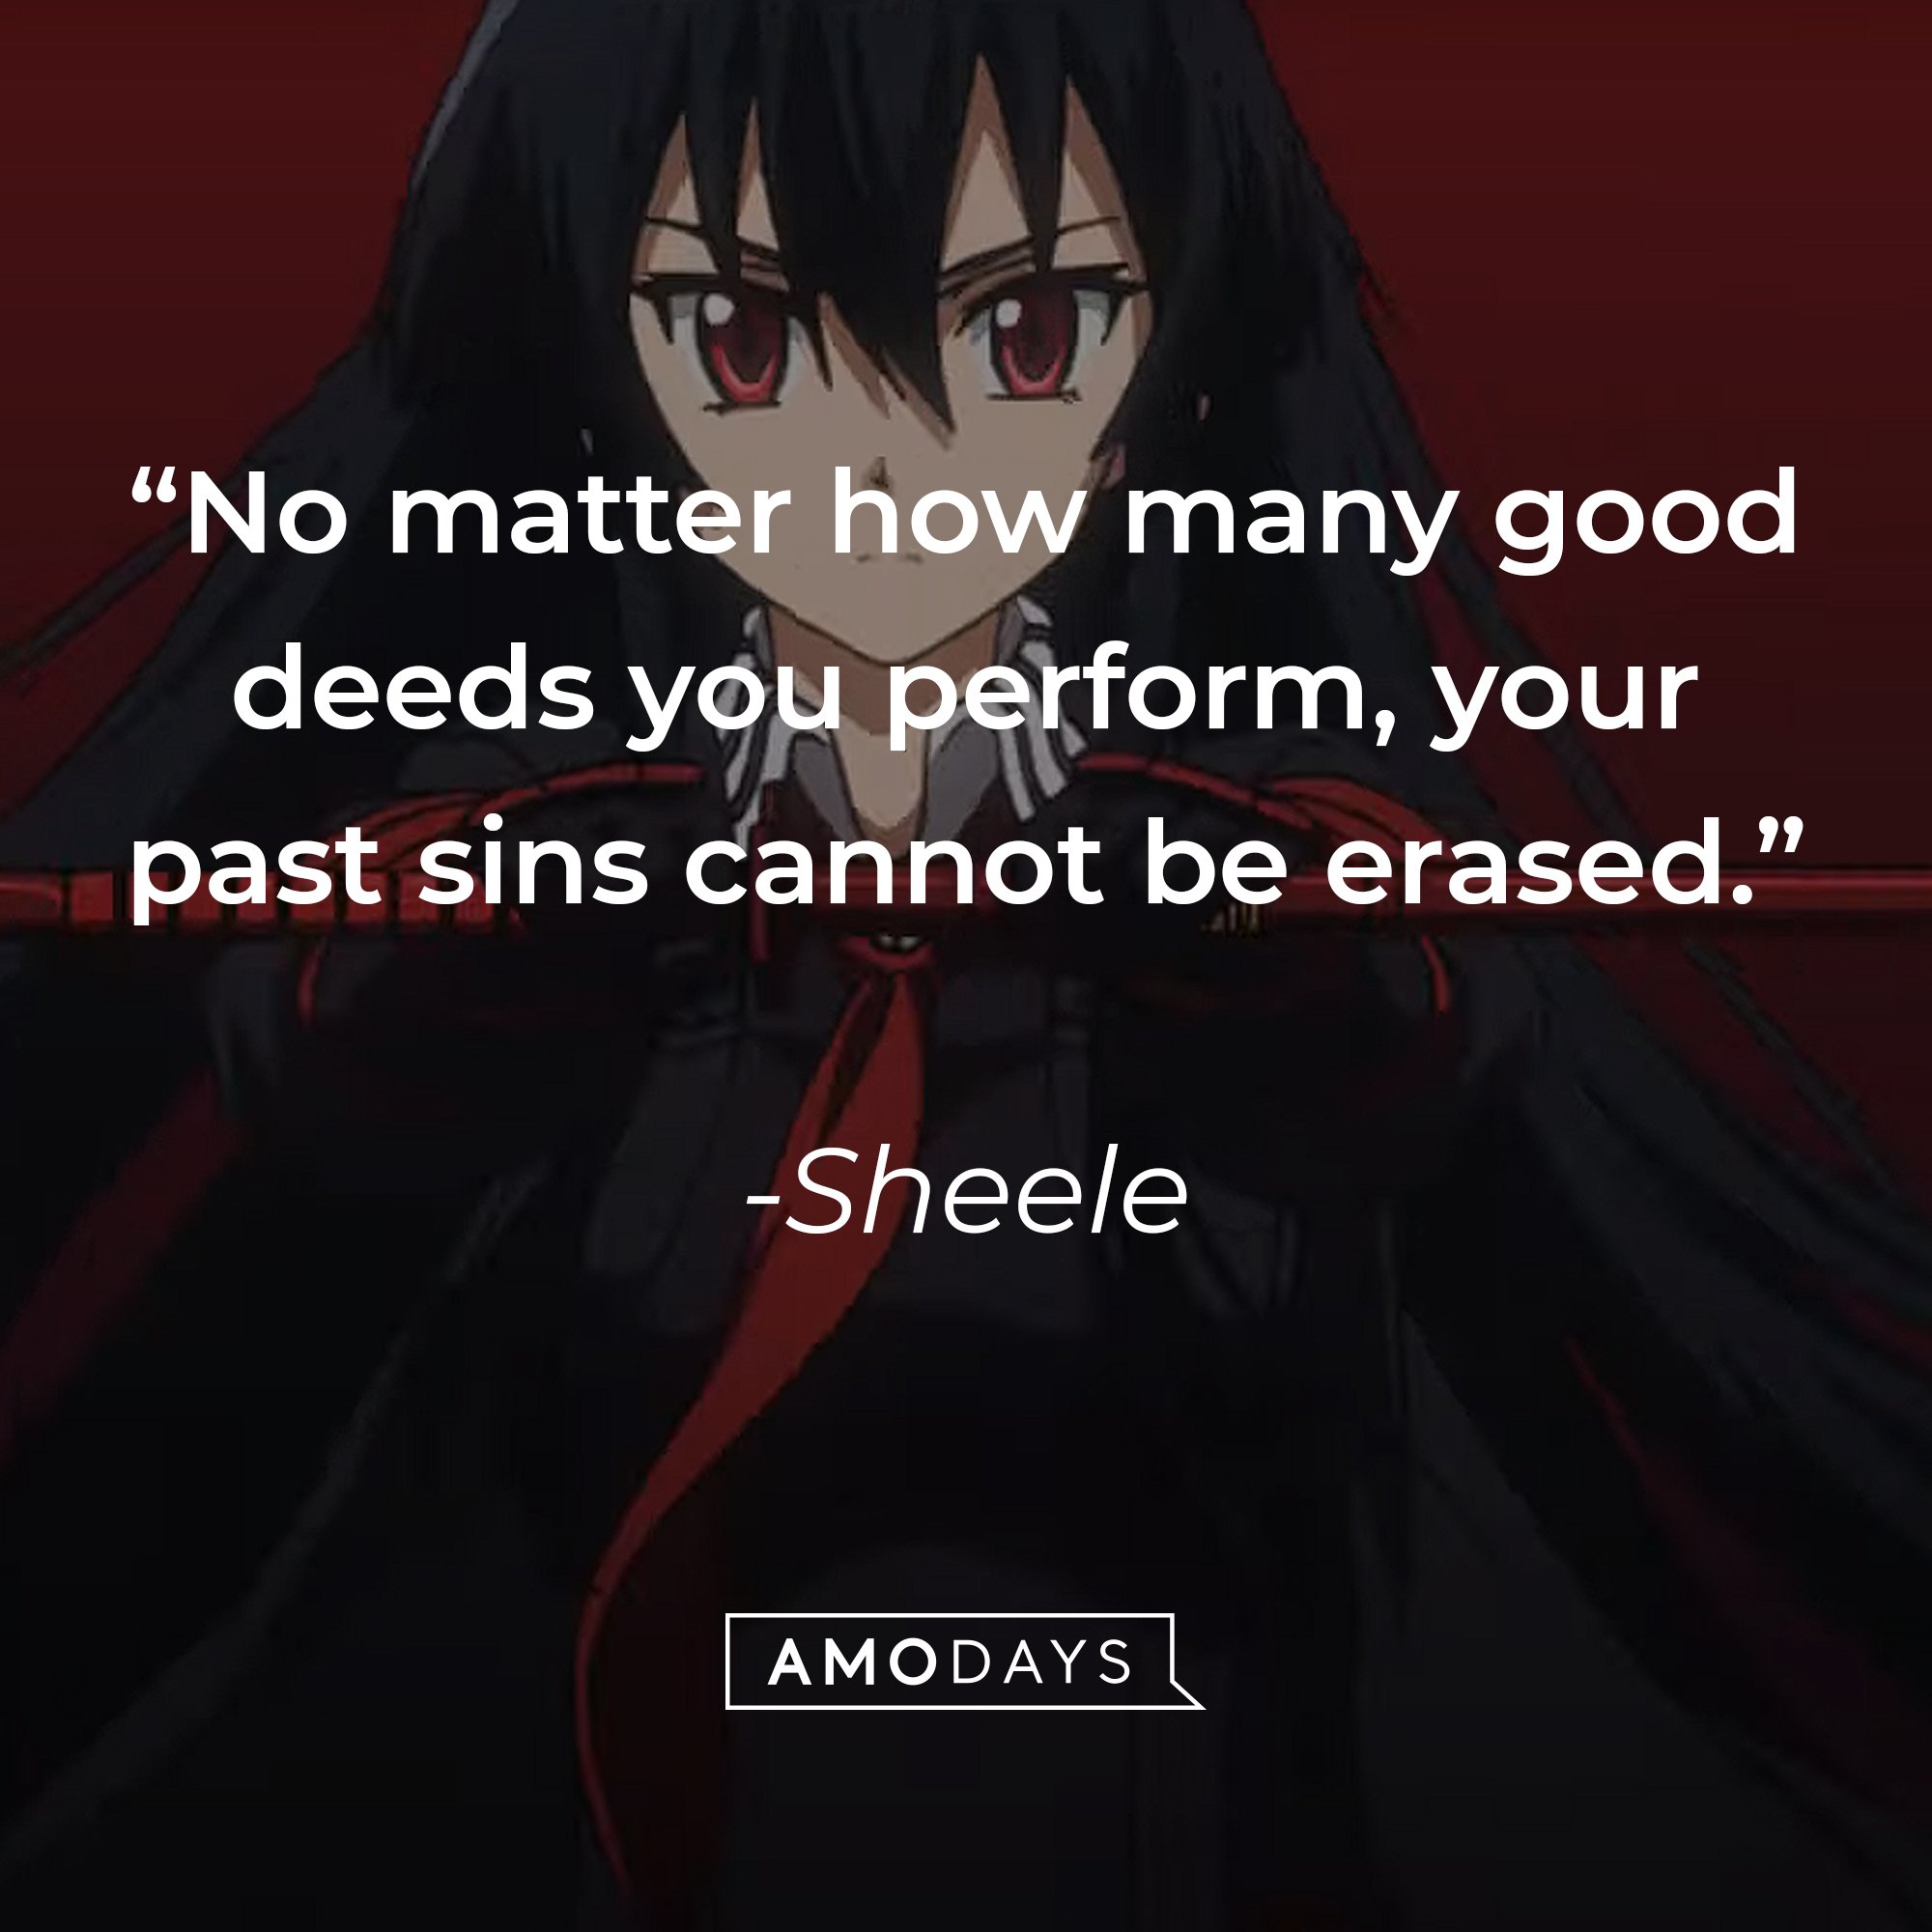 Sheele’s quote: “No matter how many good deeds you perform, your past sins cannot be erased.” | Image: AmoDays